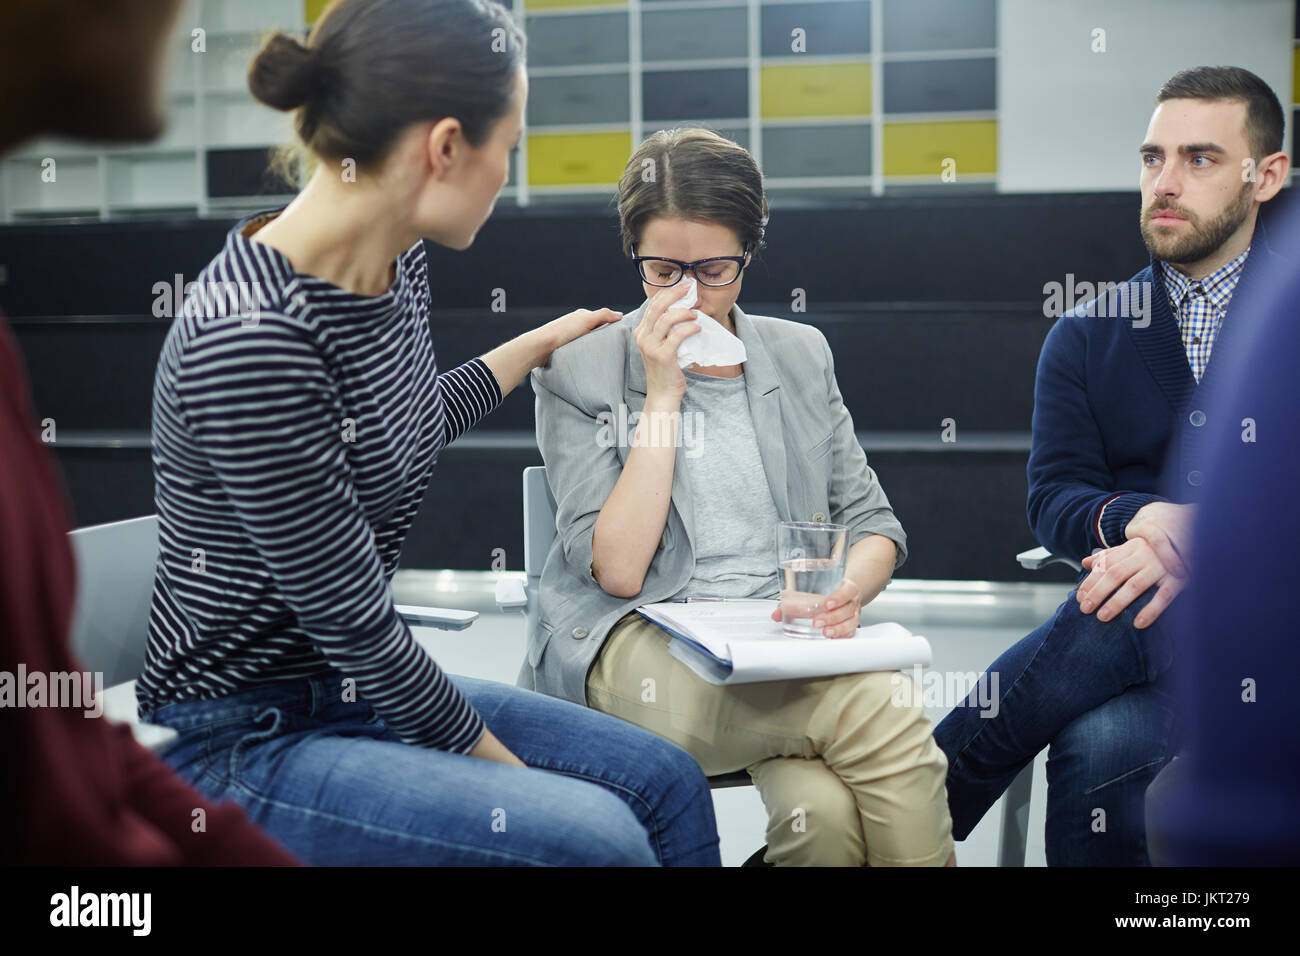 Young woman comforting her crying groupmate Stock Photo